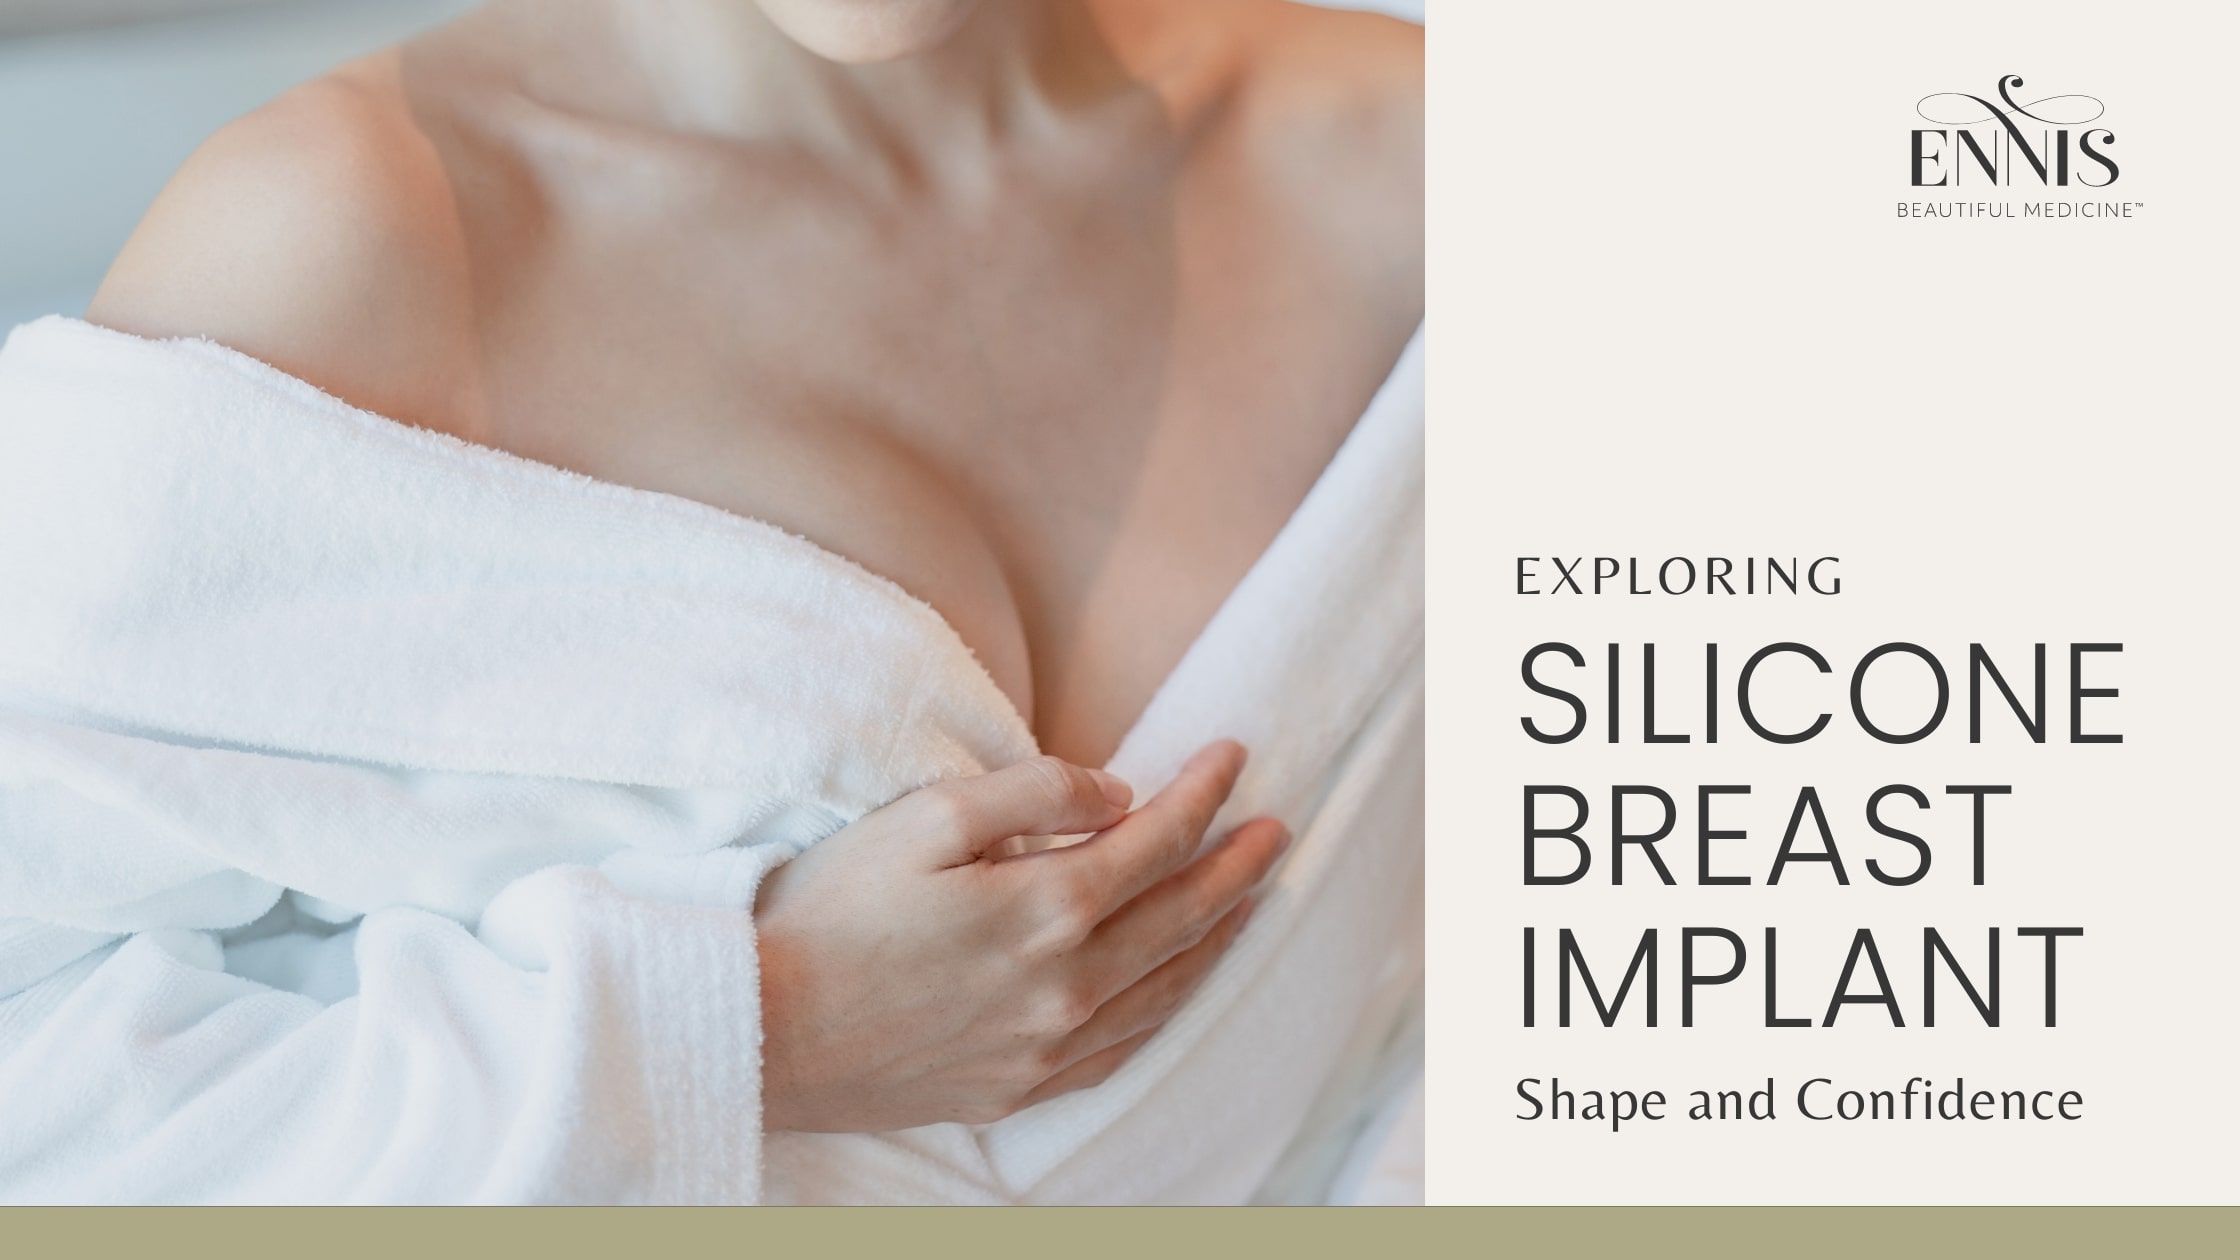 About Silicone Breast Implants by Dr. Ennis in Boca Raton